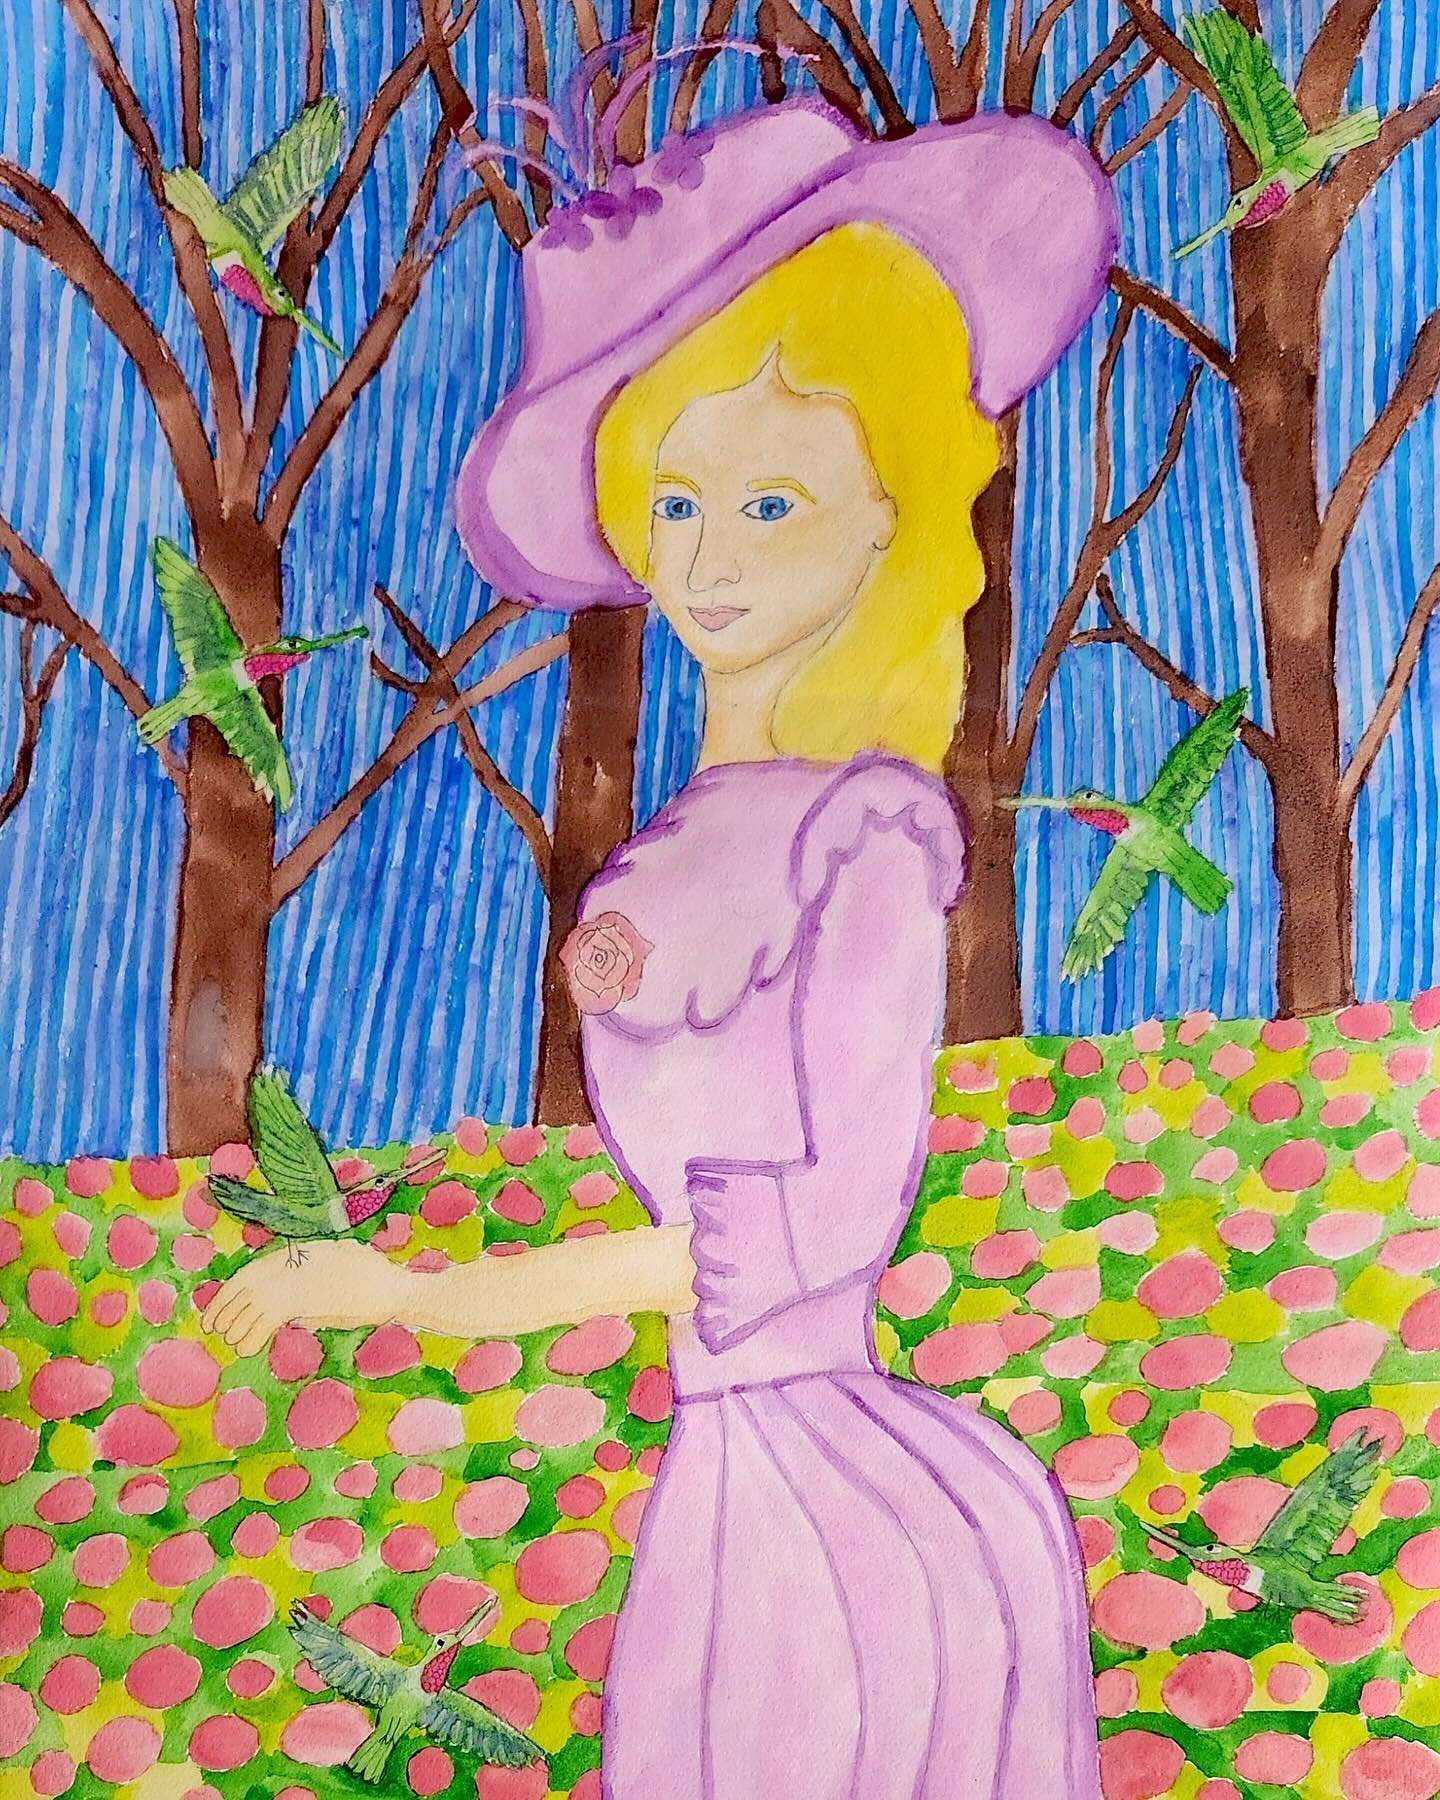 Spend a moment soaking in the patterns that make up studio artist, Jennifer Dahlquist&rsquo;s mysterious &ldquo;Hummingbird Lady&rdquo; &rsquo;s world.
.
.
.
Image description: a painting of a blonde woman wearing a lilac-colored dress and sunhat, su